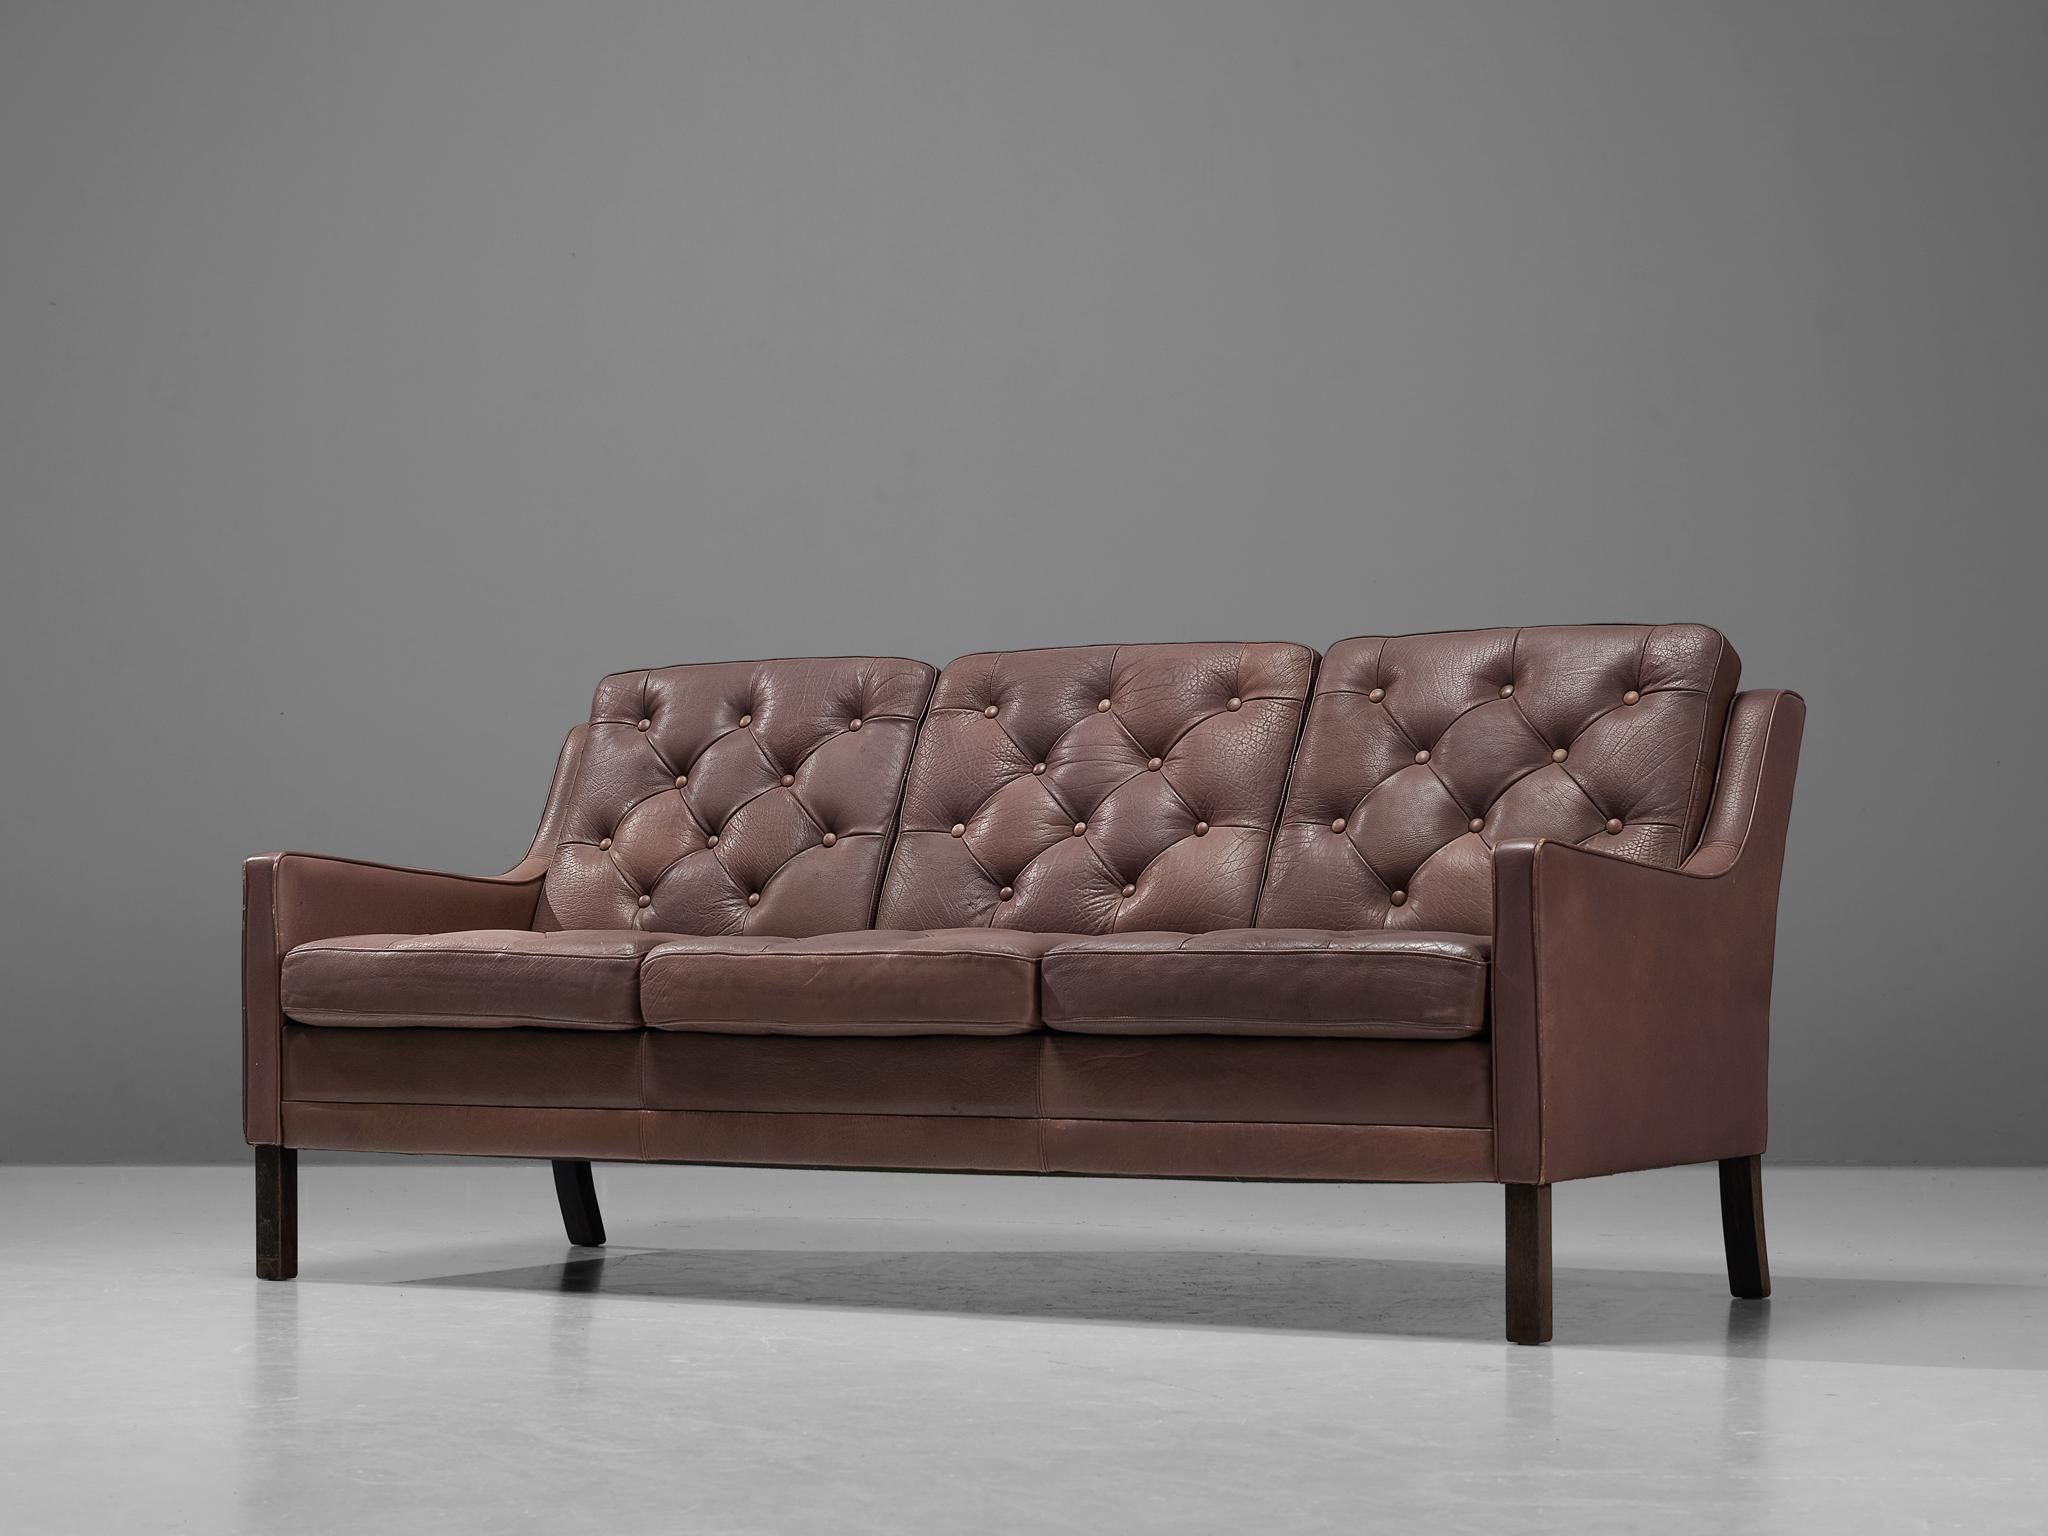 Sofa, leather, wood, Denmark, 1960s

This model reminds of Borge Mogensen's designs. The brown leather shows a light patina and is in great condition. The dawn-filled cushions with decorative buttons create a comfortable seat. Three seats offer